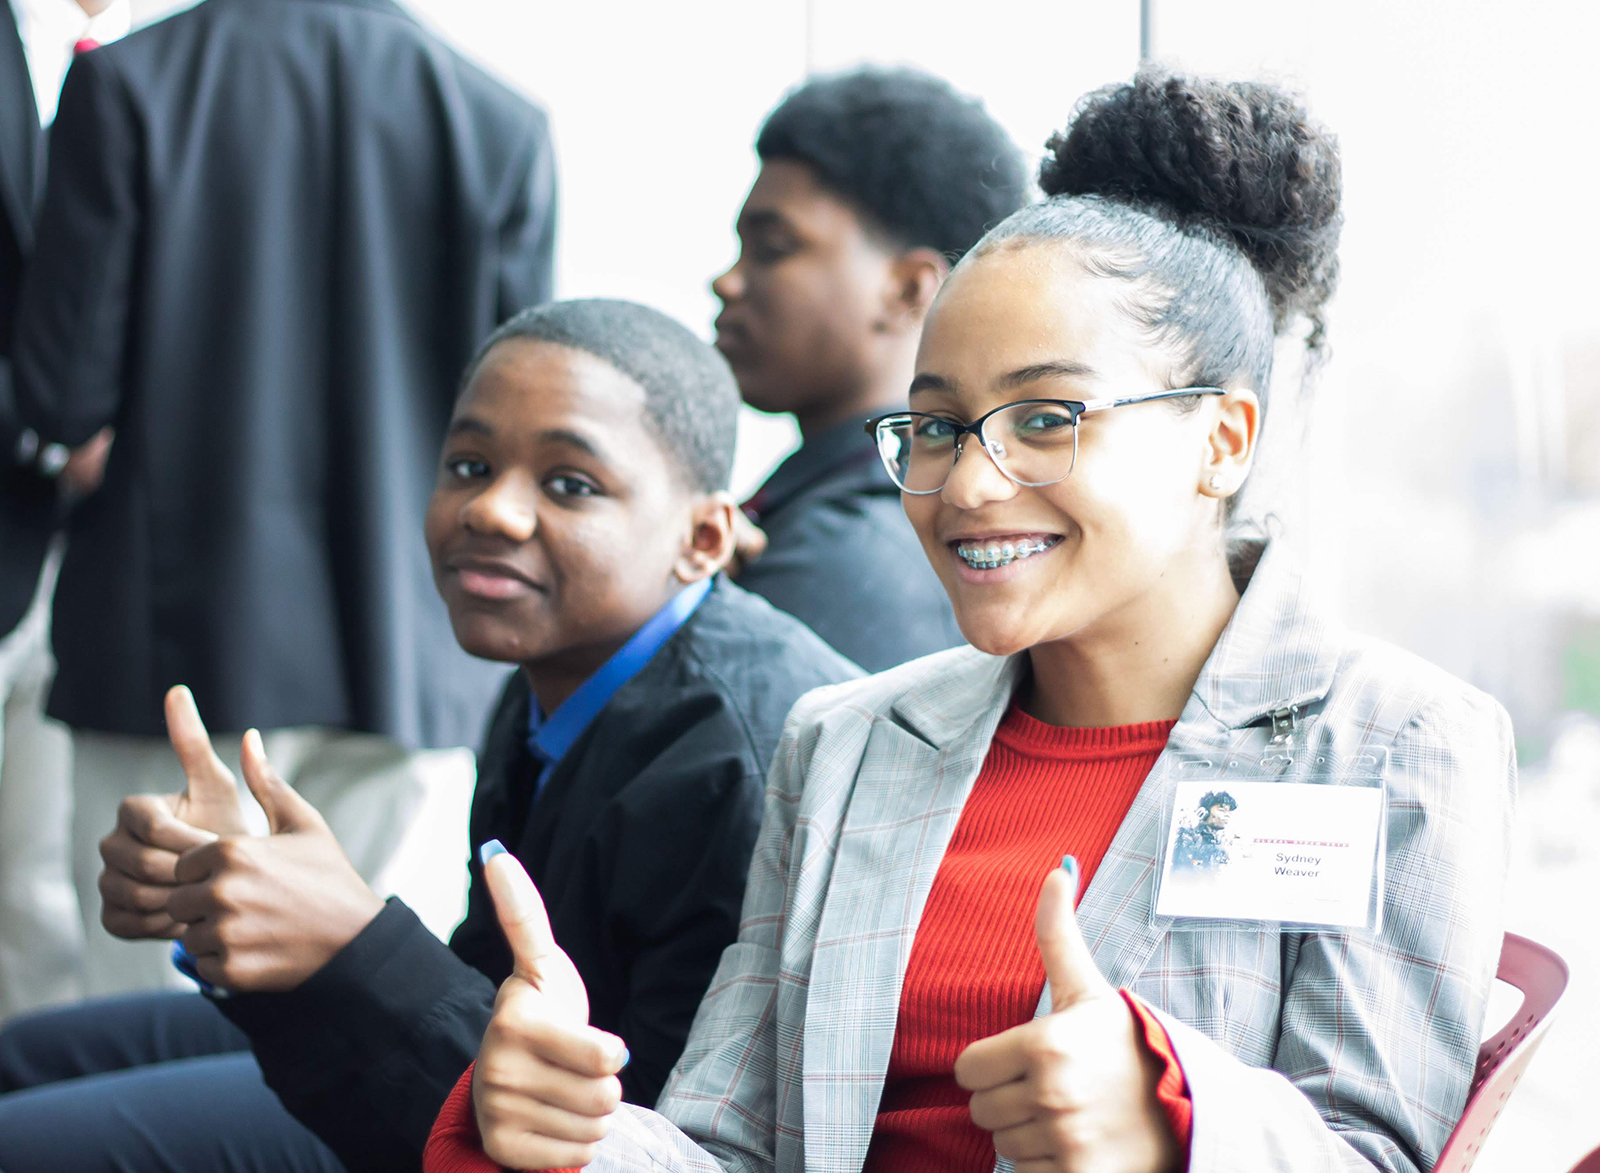 Two students at a conference smiling. One student has two thumbs up